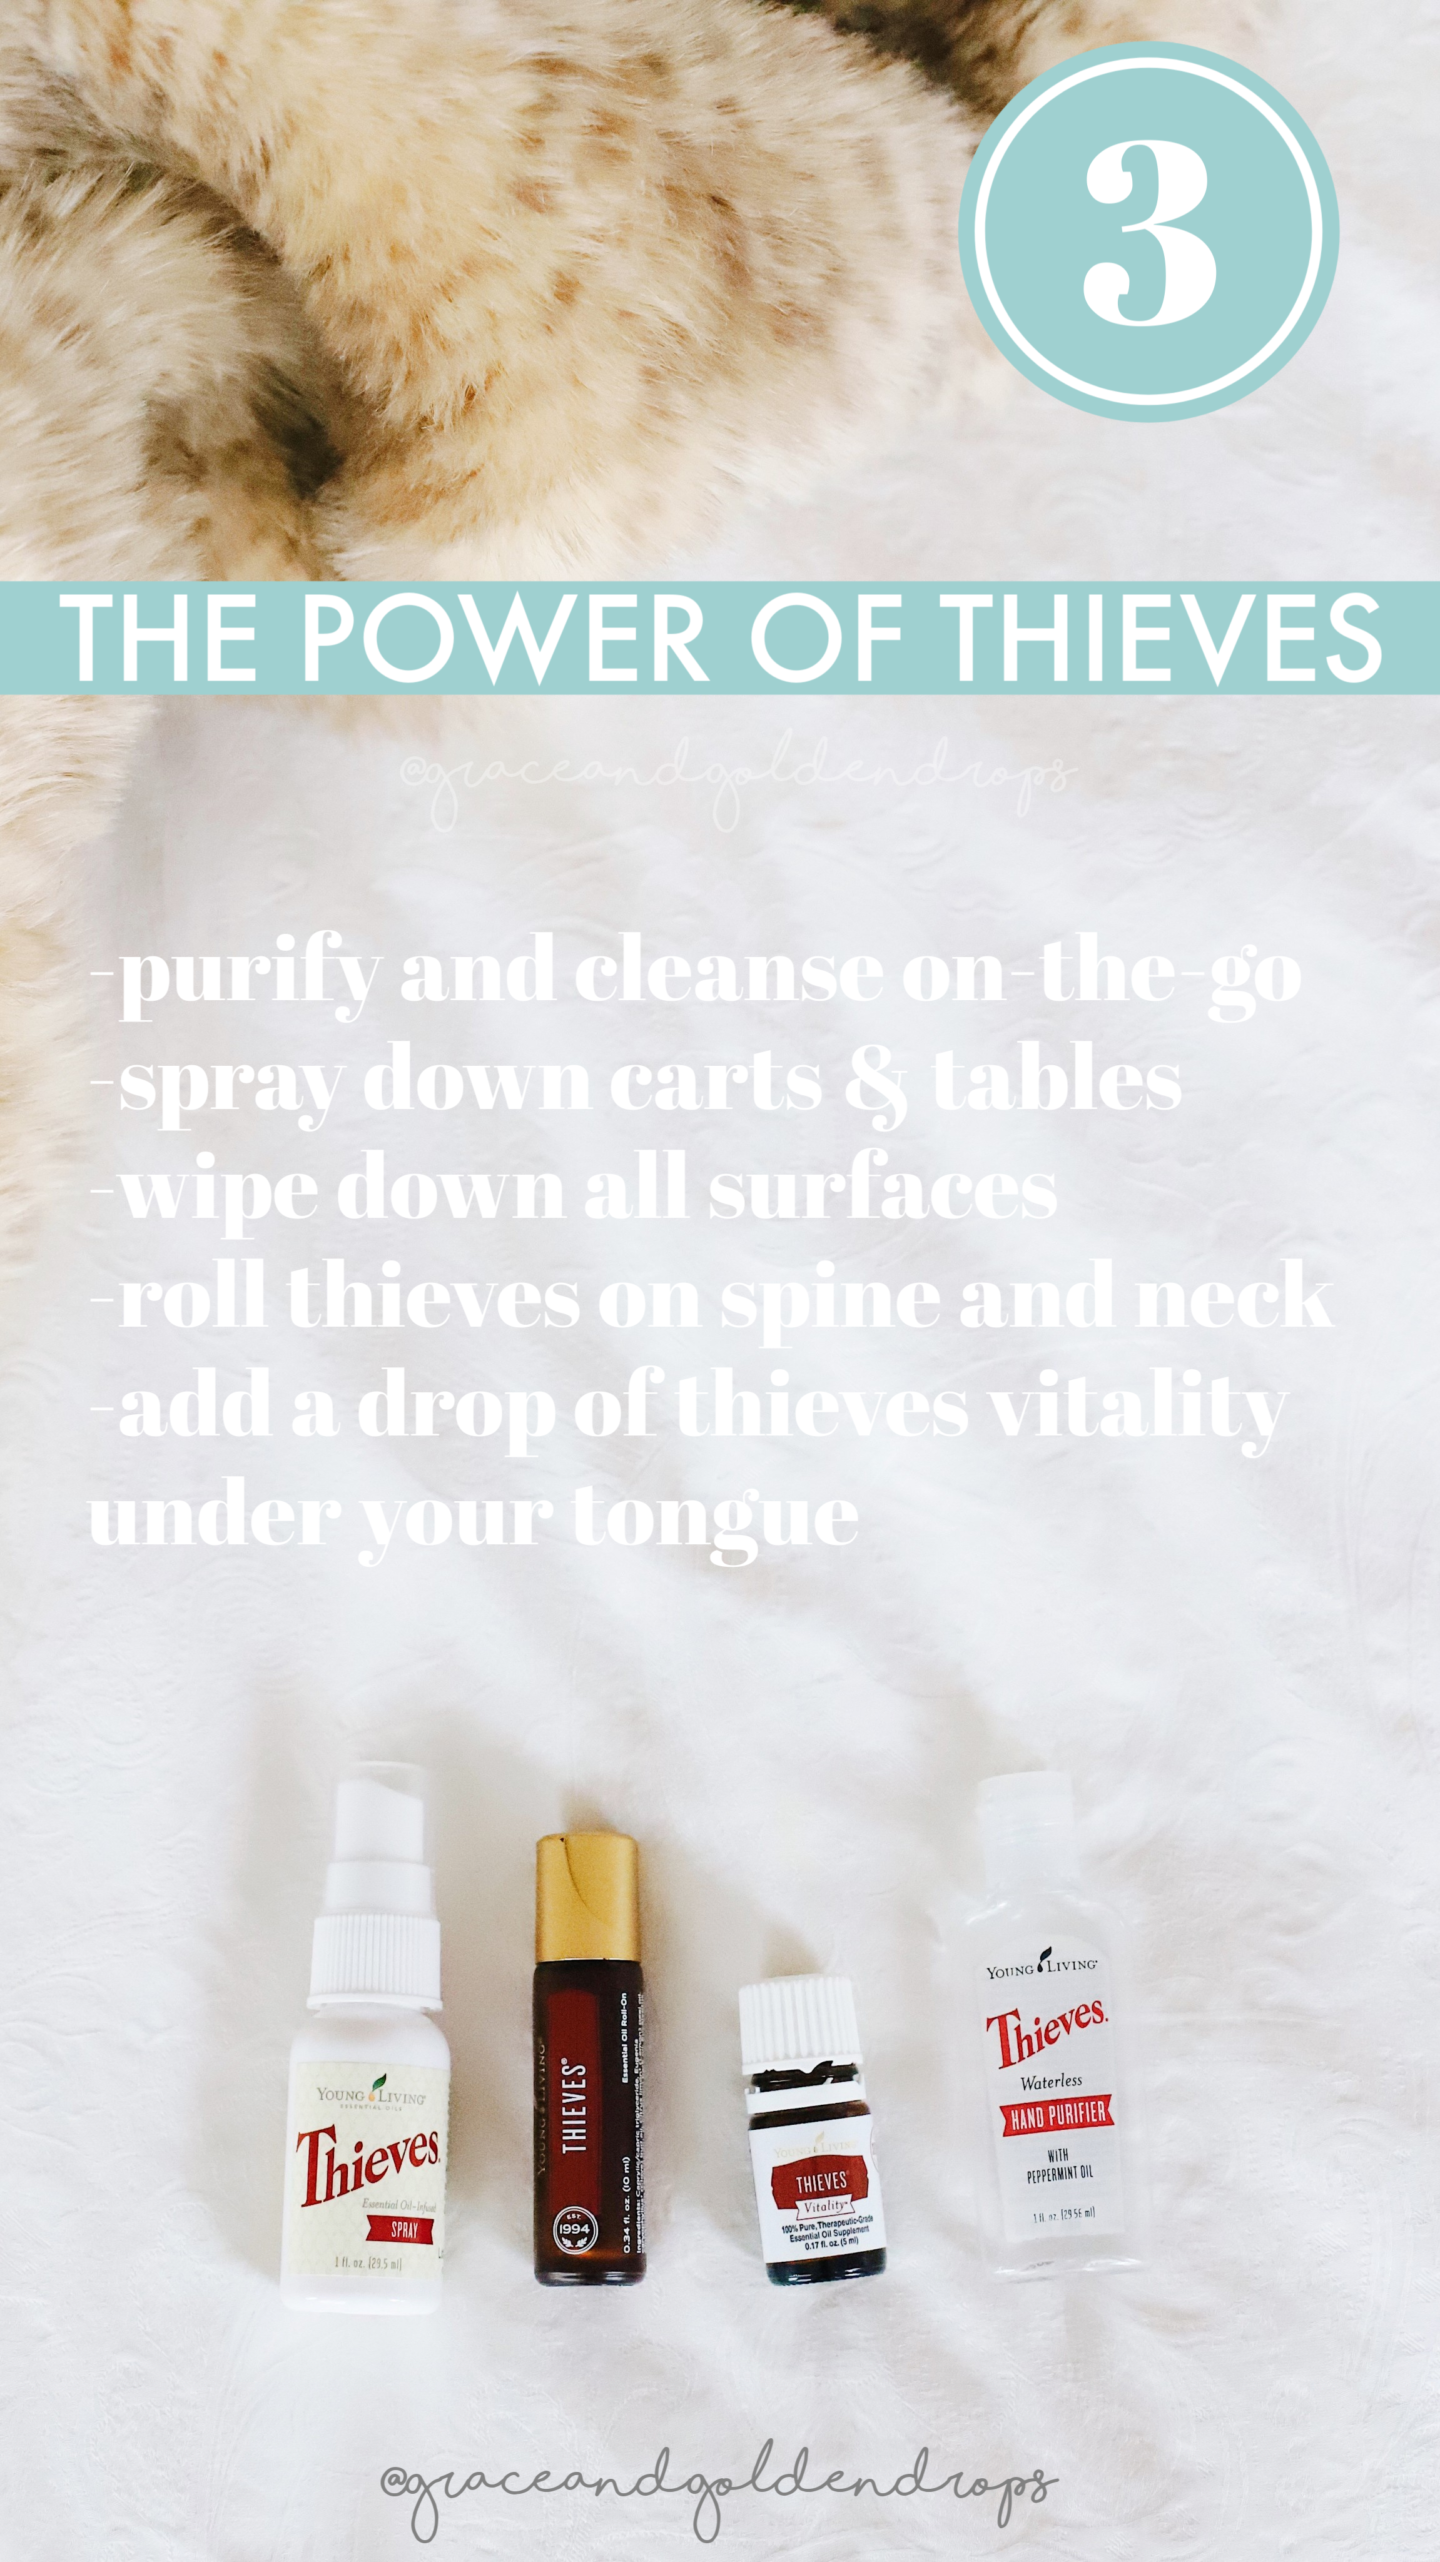 How we can survive and thrive this winter with natural remedies using essential oils and all natural products! The power of Thieves oil is real!